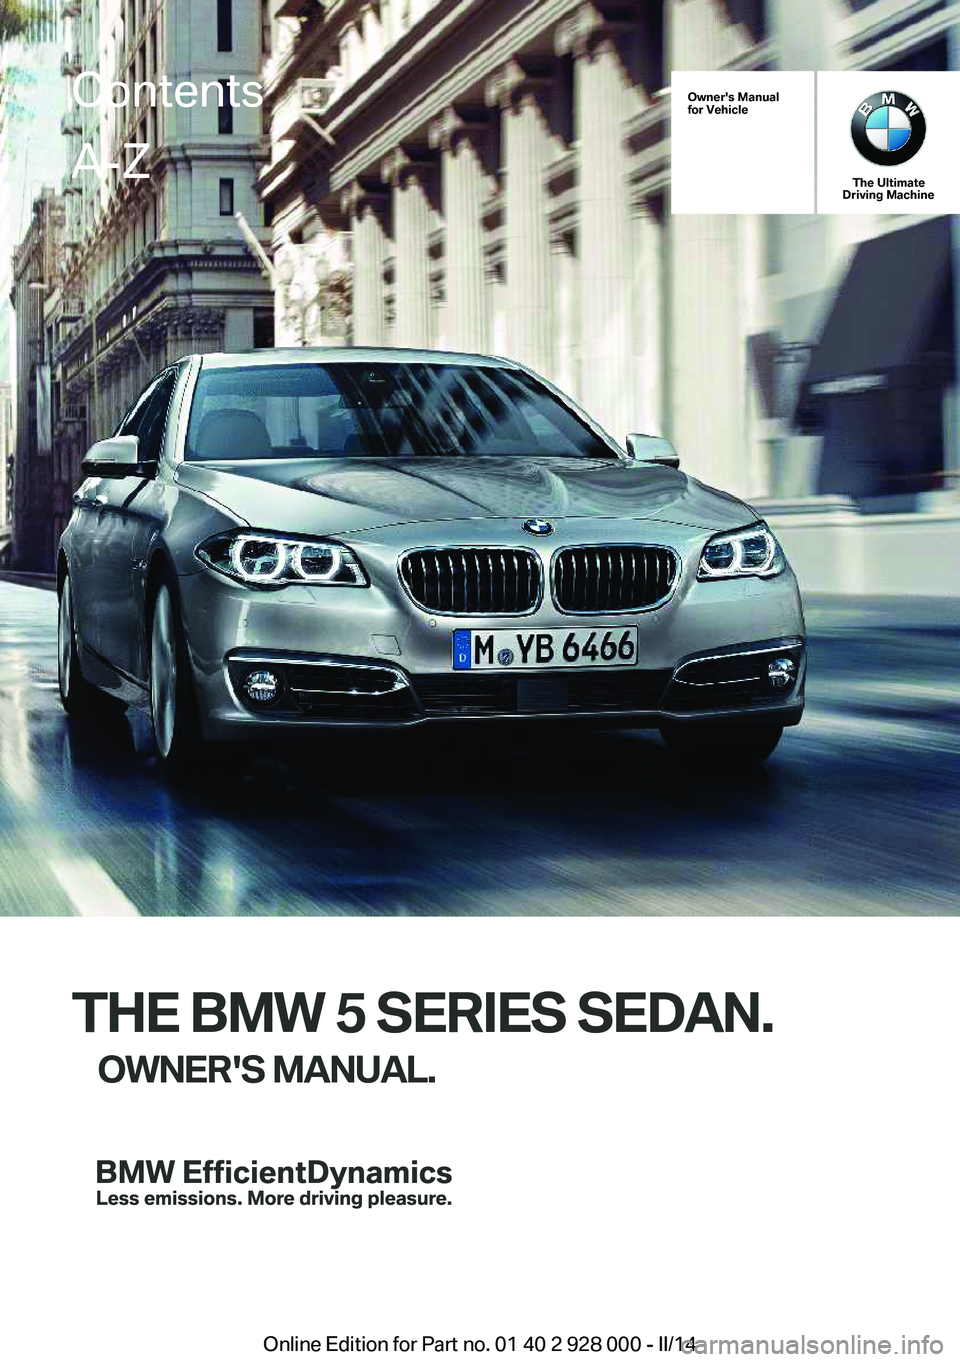 BMW 528I XDRIVE 2014  Owners Manual Owner's Manual
for Vehicle
The Ultimate
Driving Machine
THE BMW 5 SERIES SEDAN.
OWNER'S MANUAL.
ContentsA-Z
Online Edition for Part no. 01 40 2 928 000 - II/14   